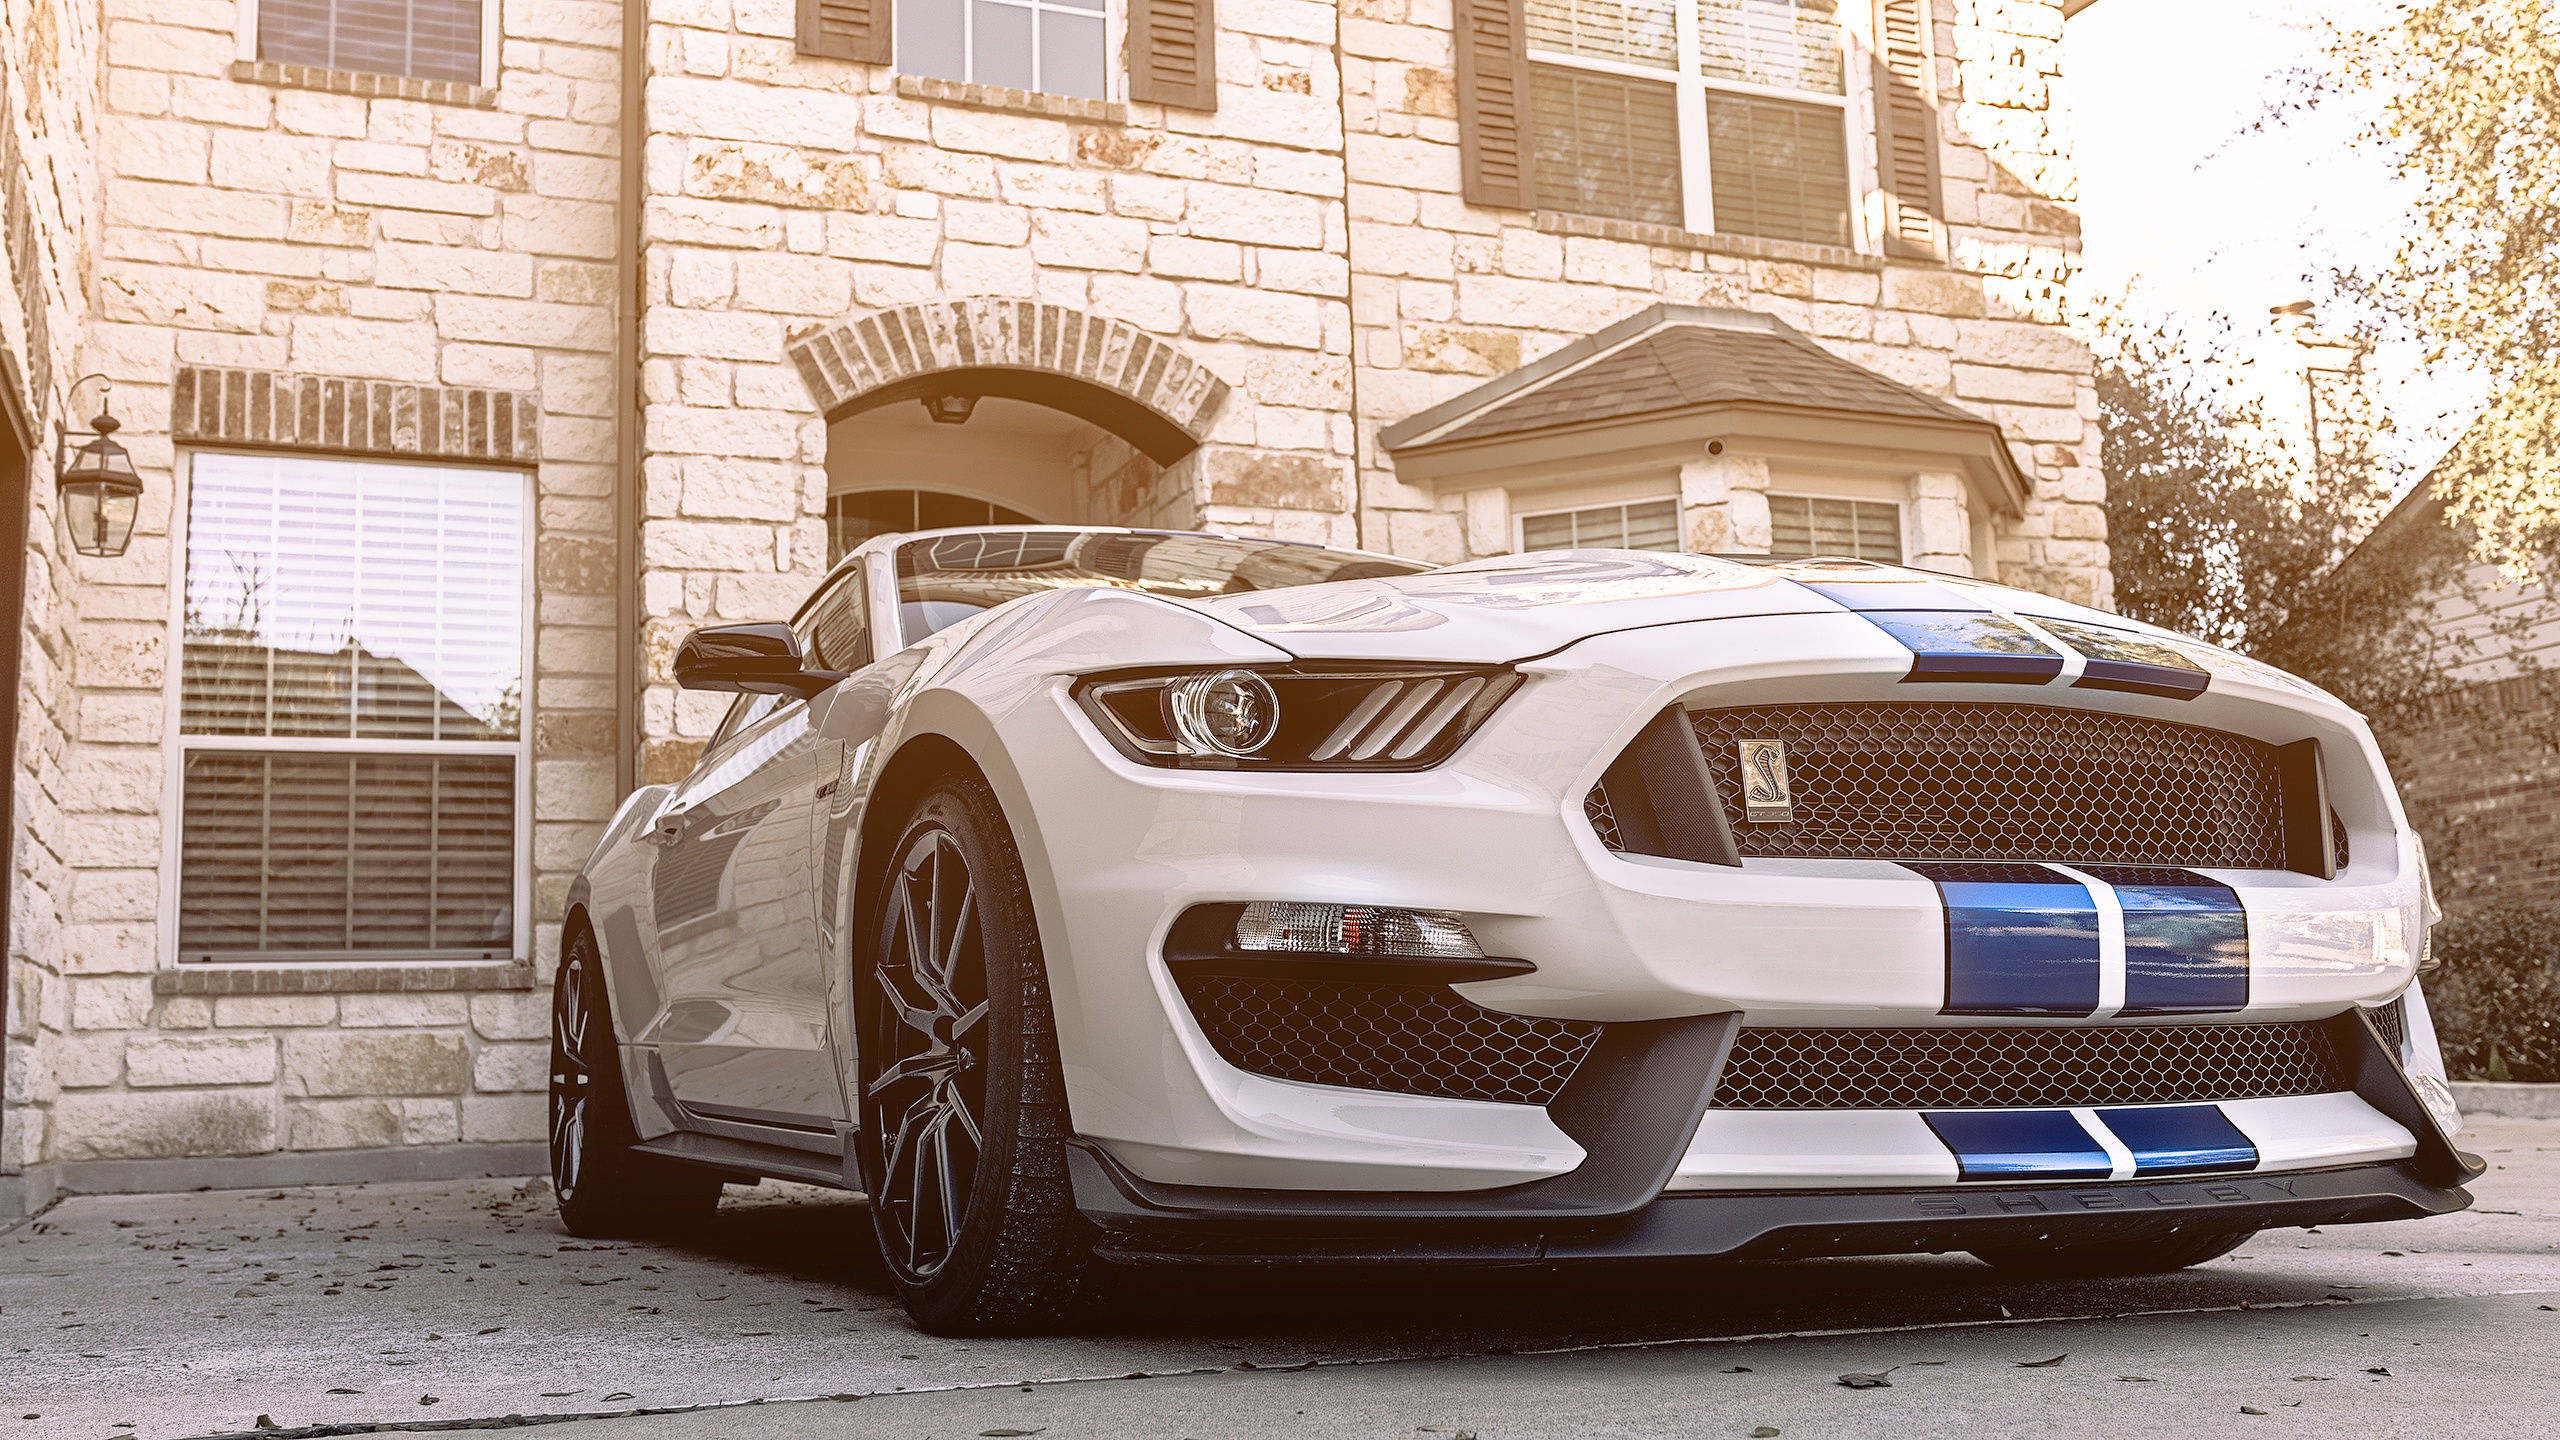 General 2560x1440 car depth of field Ford Mustang Shelby Ford Ford Mustang Ford Mustang S550 muscle cars American cars